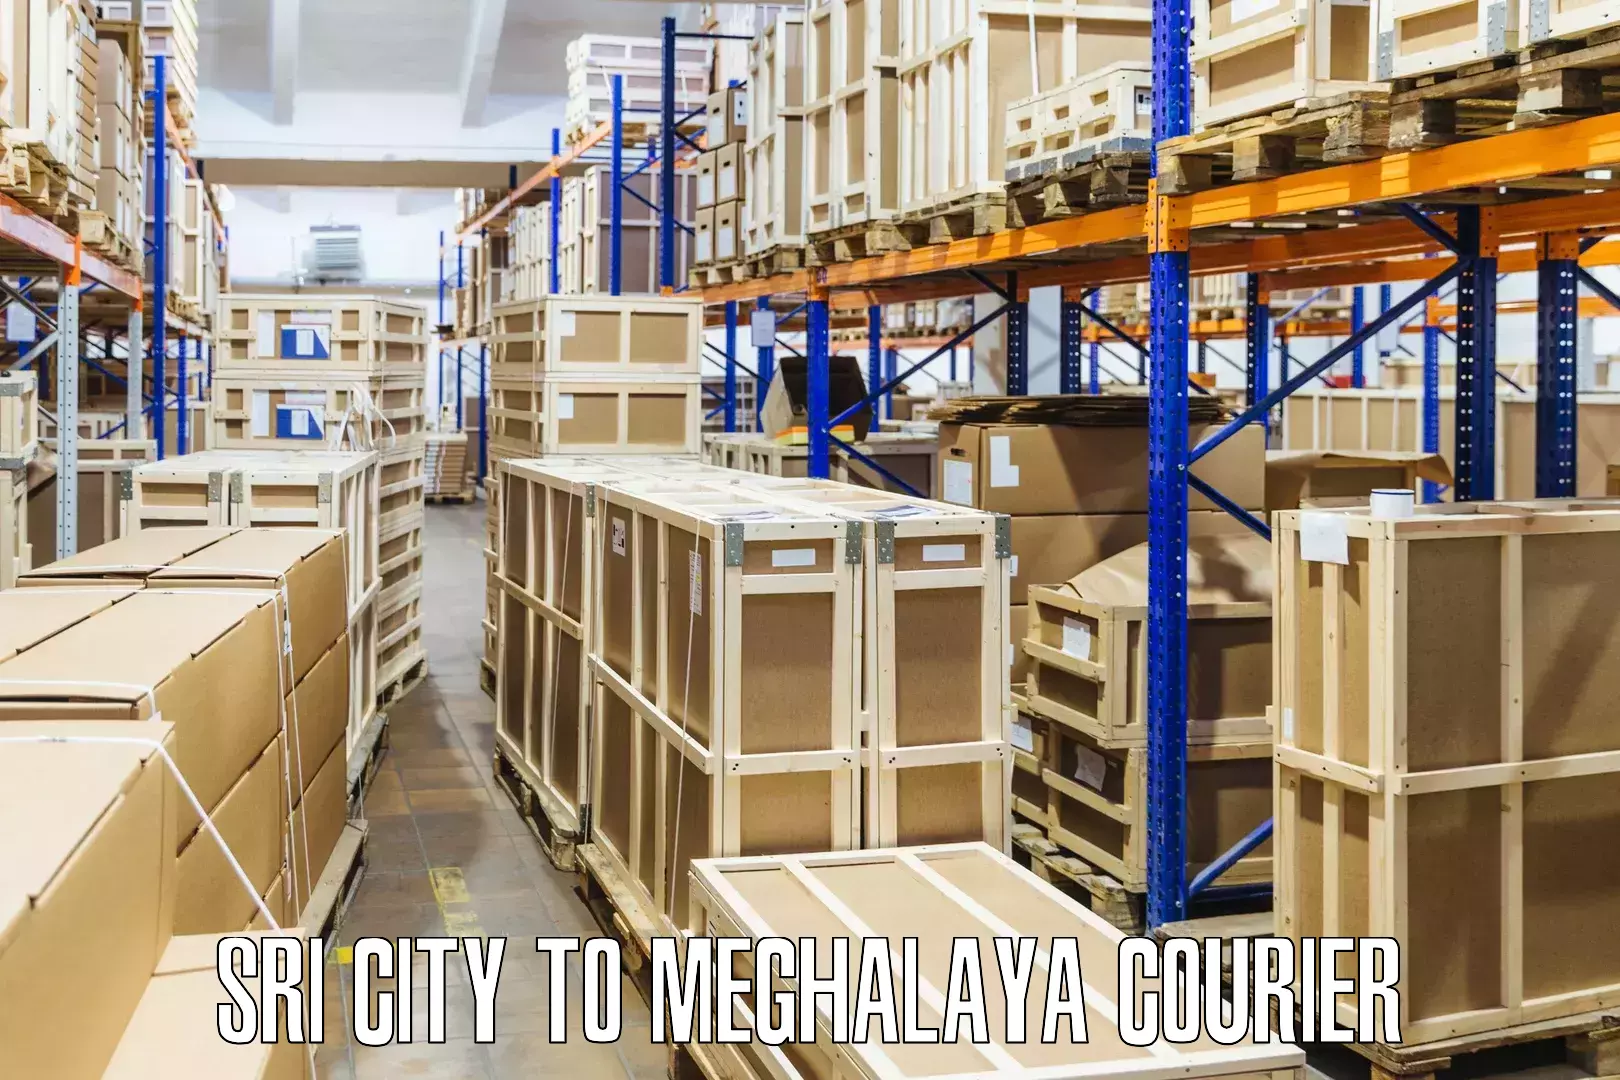 Express delivery network in Sri City to Meghalaya